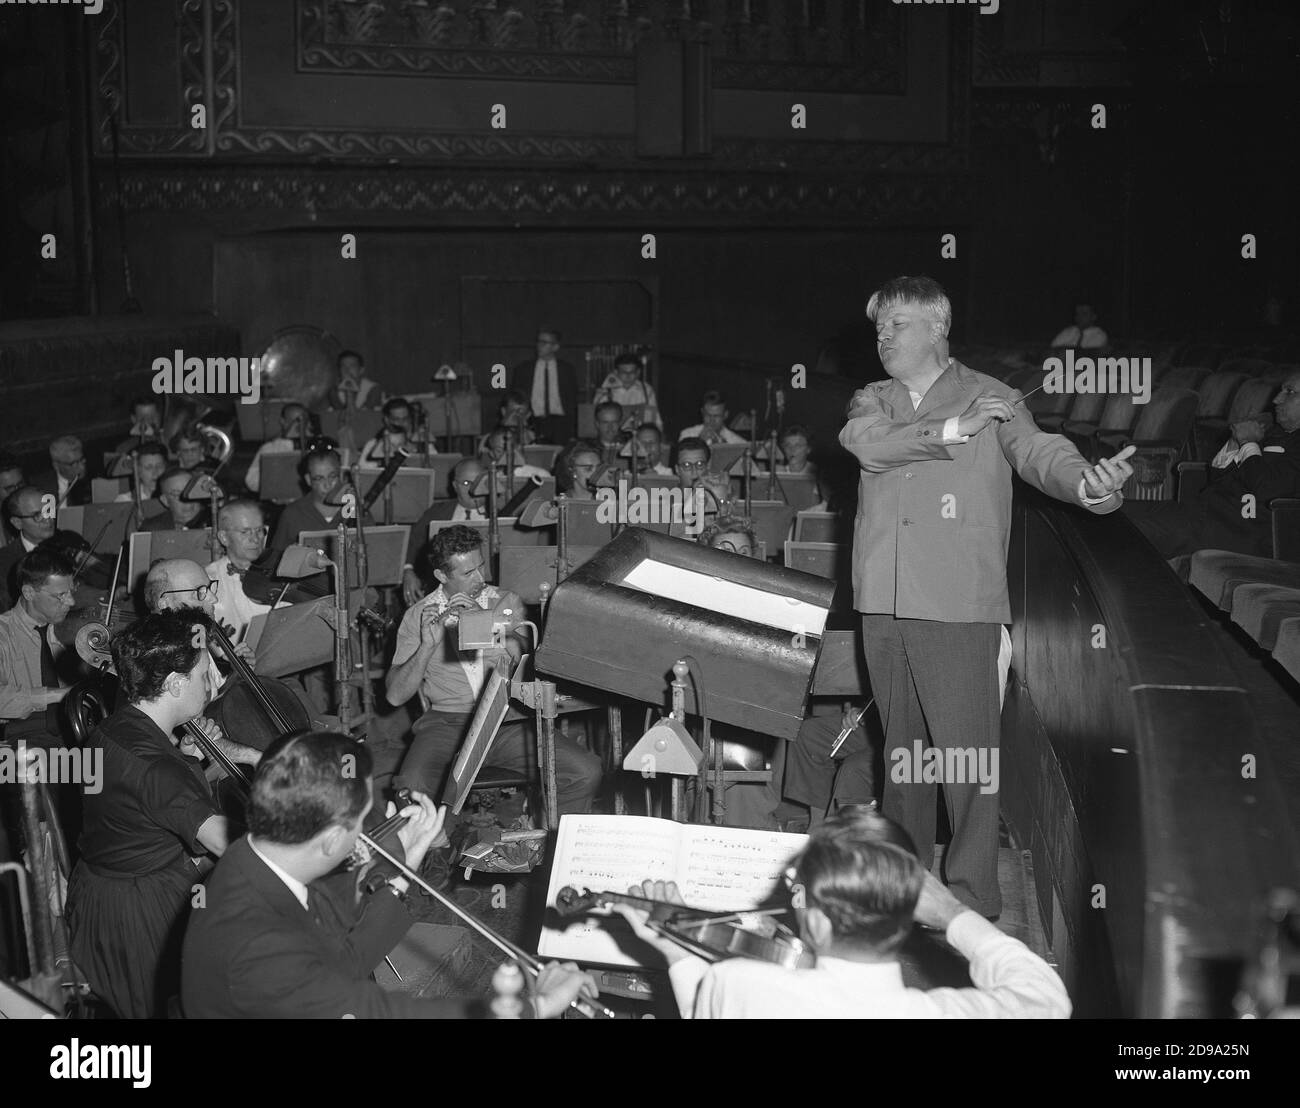 1959 , CHICAGO , USA : The renowned italian music conductor GIANANDREA GAVAZZENI ( 1909 - 1996 ) and the orchestra rehearsing Giuseppe Verdi 's ' Simon Boccanegra '  in Chicago's Opera House, October 22, 1959 . Gianandrea Gavazzeni (25 July 1909 - 5 February 1996) was an Italian pianist, conductor (especially of opera), composer and musicologist . Gavazzeni was born in Bergamo. For almost 50 years, starting from 1948, he was principal conductor at La Scala, Milan, in 1966-68 being its music and artistic director. He had his Metropolitan Opera debut on 11 October 1976 . He conducted eight perfo Stock Photo